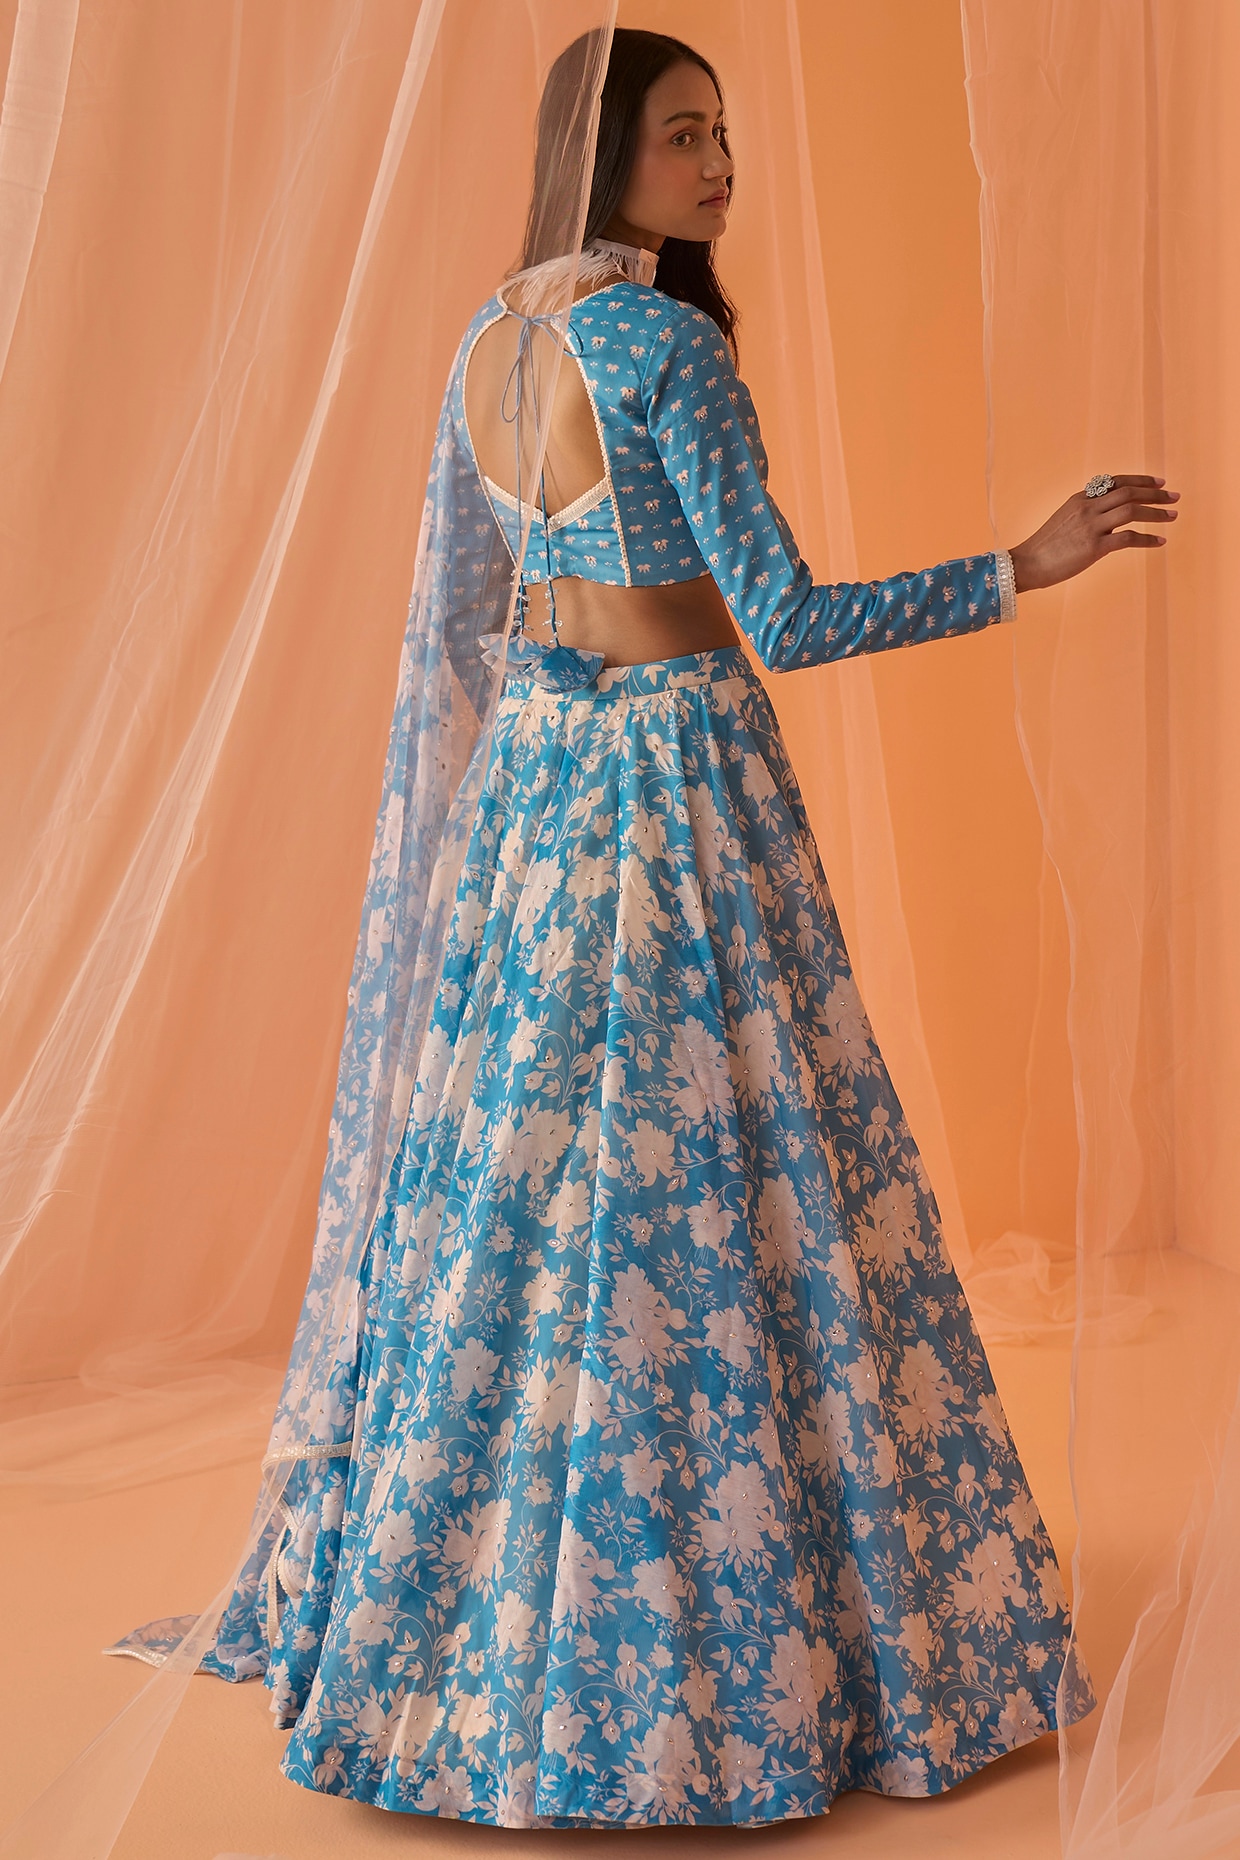 Delightful Spring/ Summer Floral Lehenga and Saree Designs for 2019 | Floral  lehenga, Indian outfits lehenga, Stylish dresses